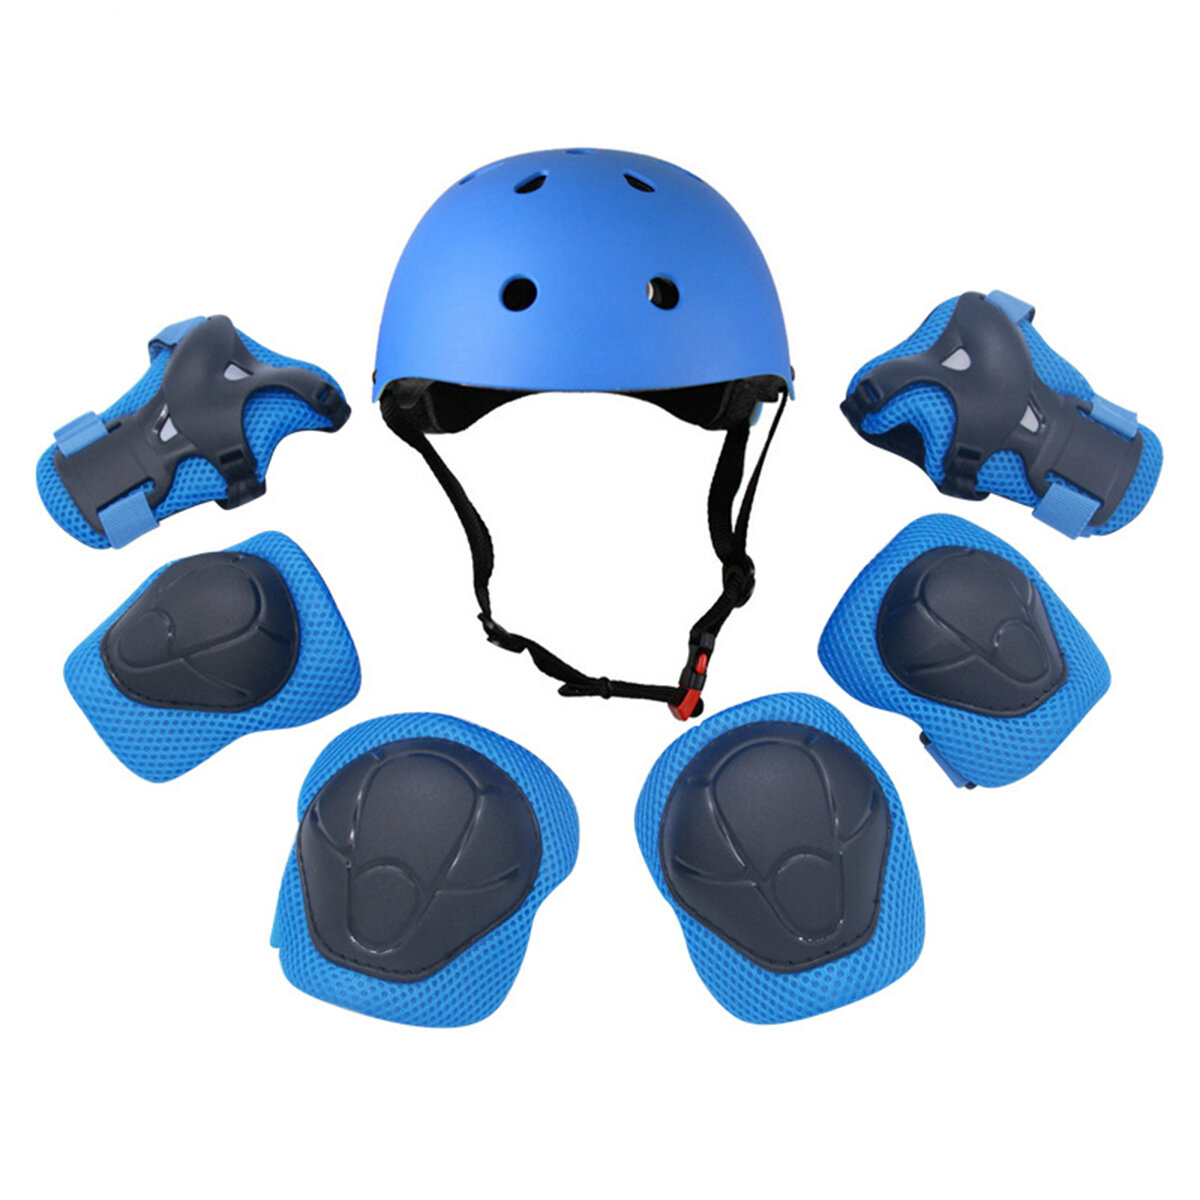 

7pcs Children Helmet Elbow Knee Hand Pads Kids Sports Protective Gear For Motorcycle Riding Cycling Skating Skateboard B